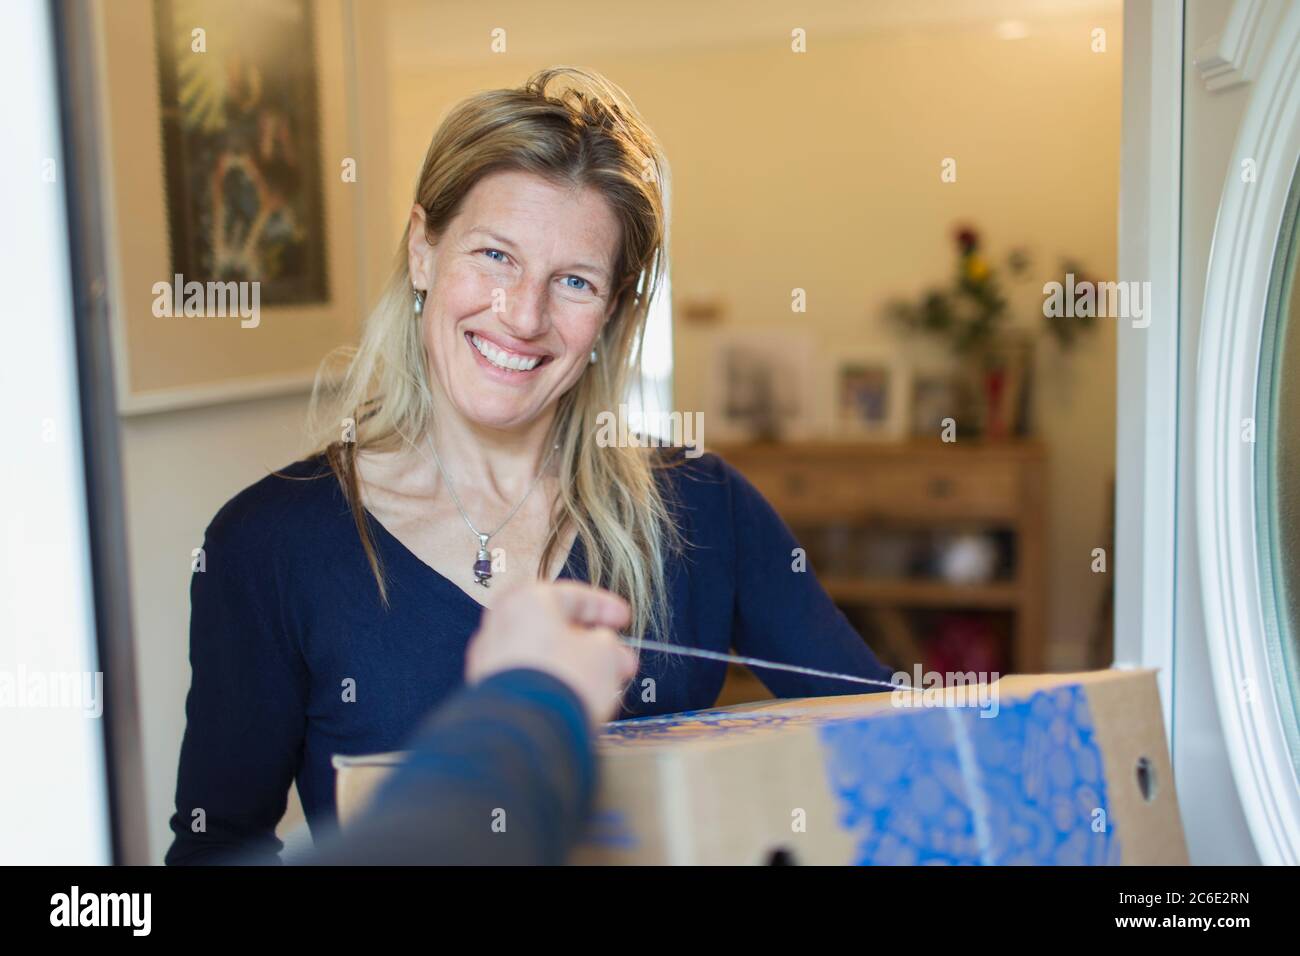 Portrait smiling woman receiving delivery at front door Stock Photo